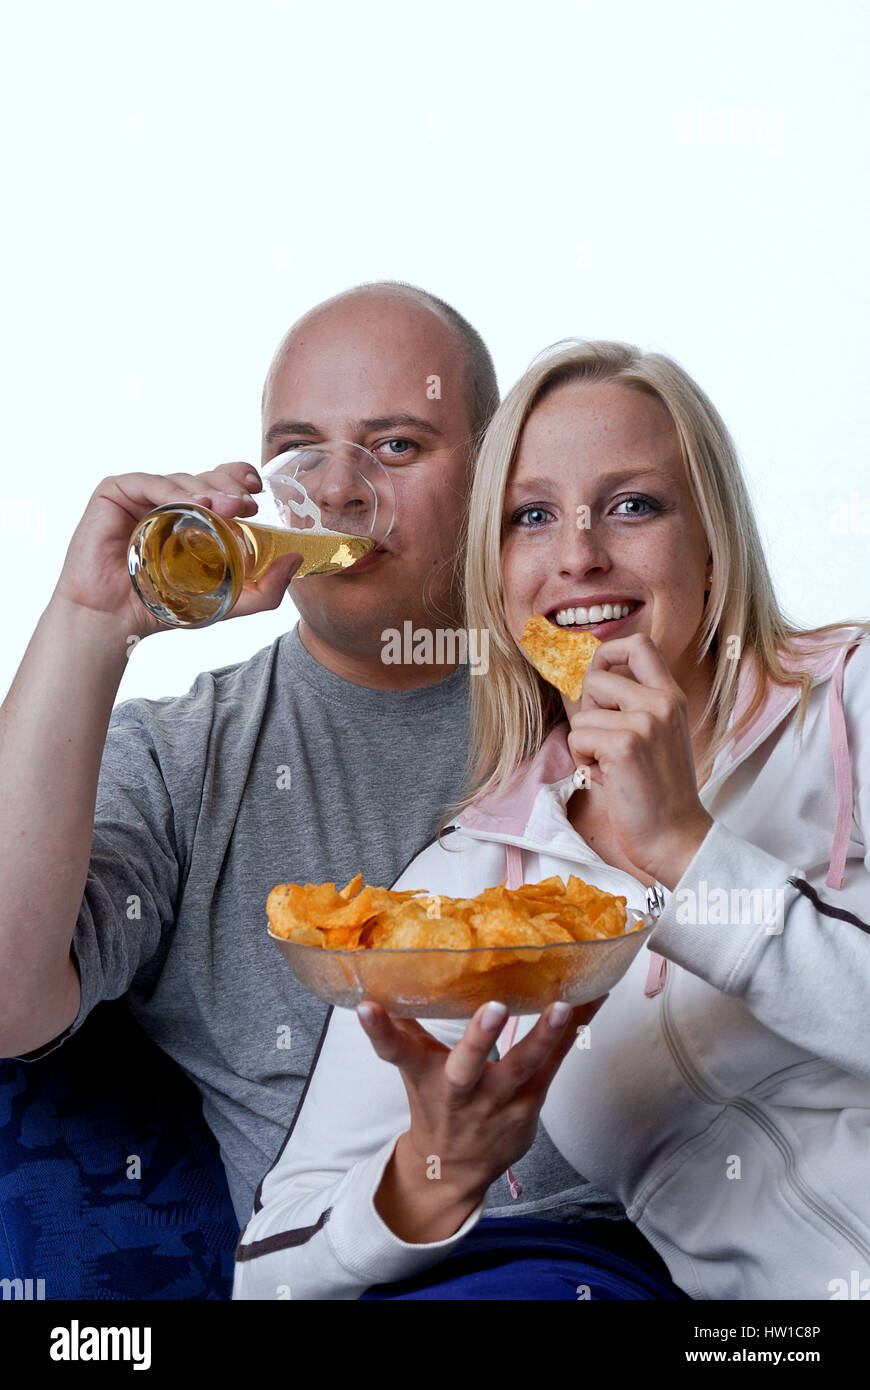 Chips and beer, Chips und Bier Stock Photo